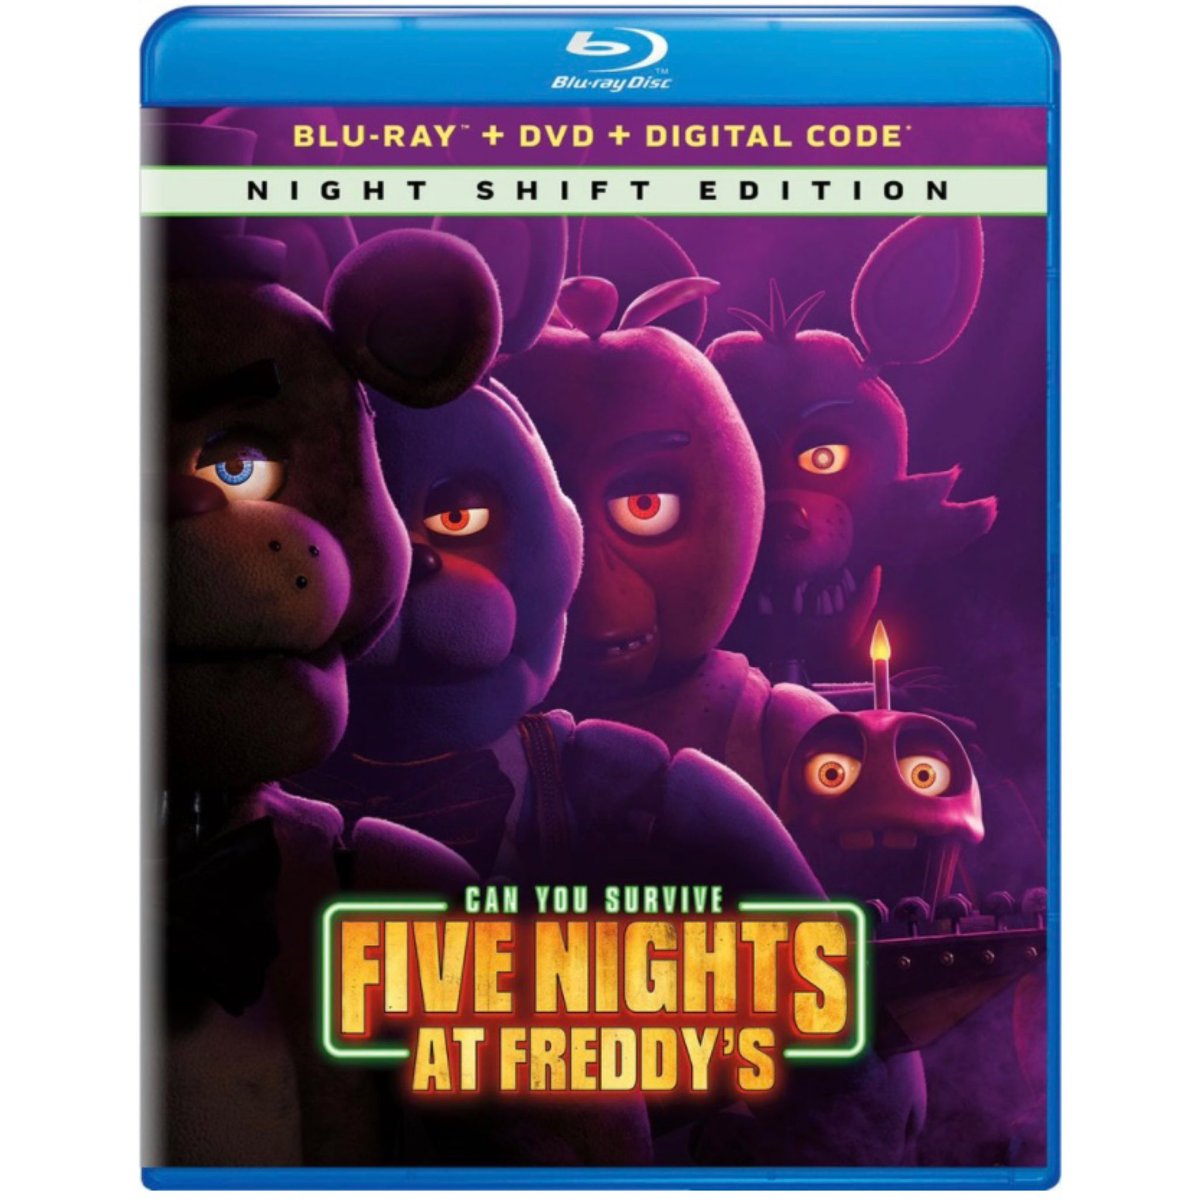 Still time to grab the biggest horror movie of the year for the Faz-Fan in your life!

 #fnaf #fnafmovie #fivenightsatfreddys #puppet #puppets #puppeteer #puppeteers #freddyfazbear #goldenfreddy #fazbearpuppeteer #bluray